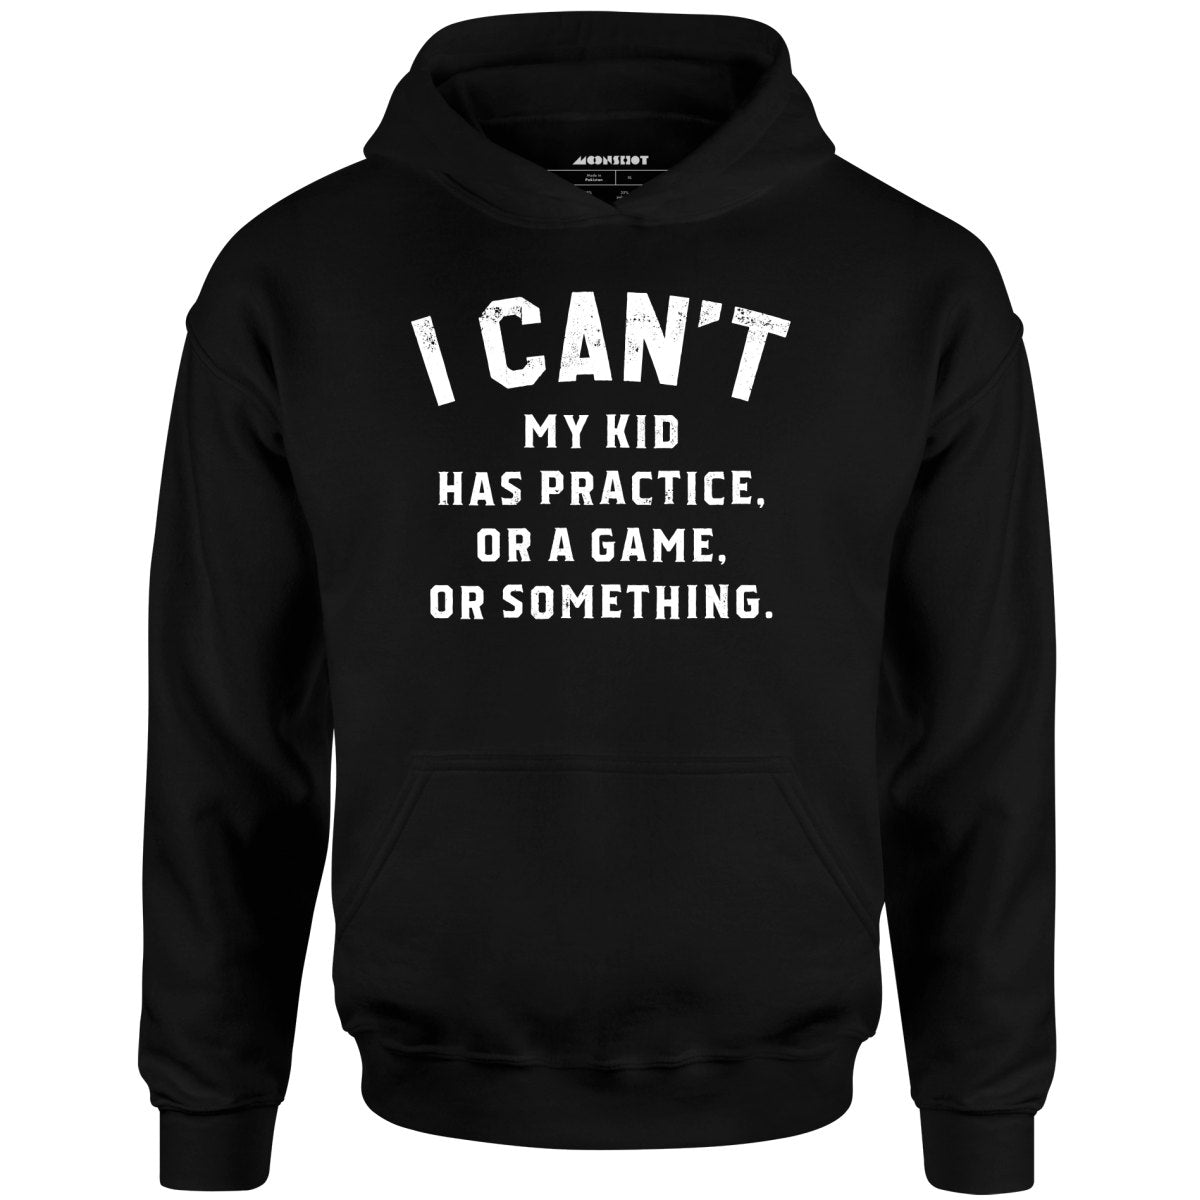 I Can't - Unisex Hoodie